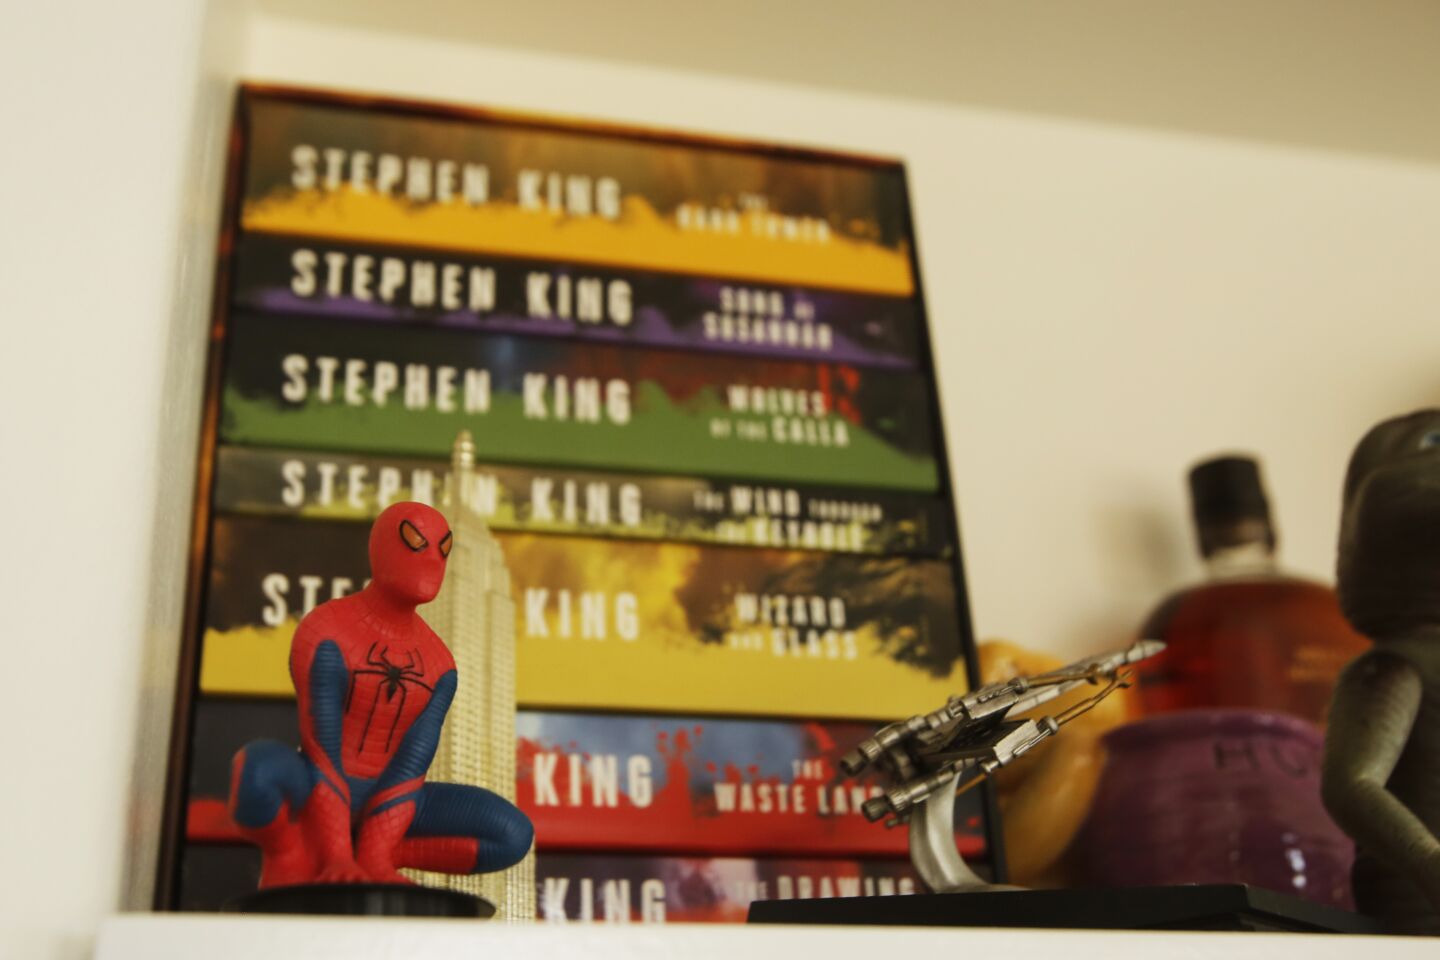 A spider man figurine from "The Amazing Spiderman" premiere in Tokyo.